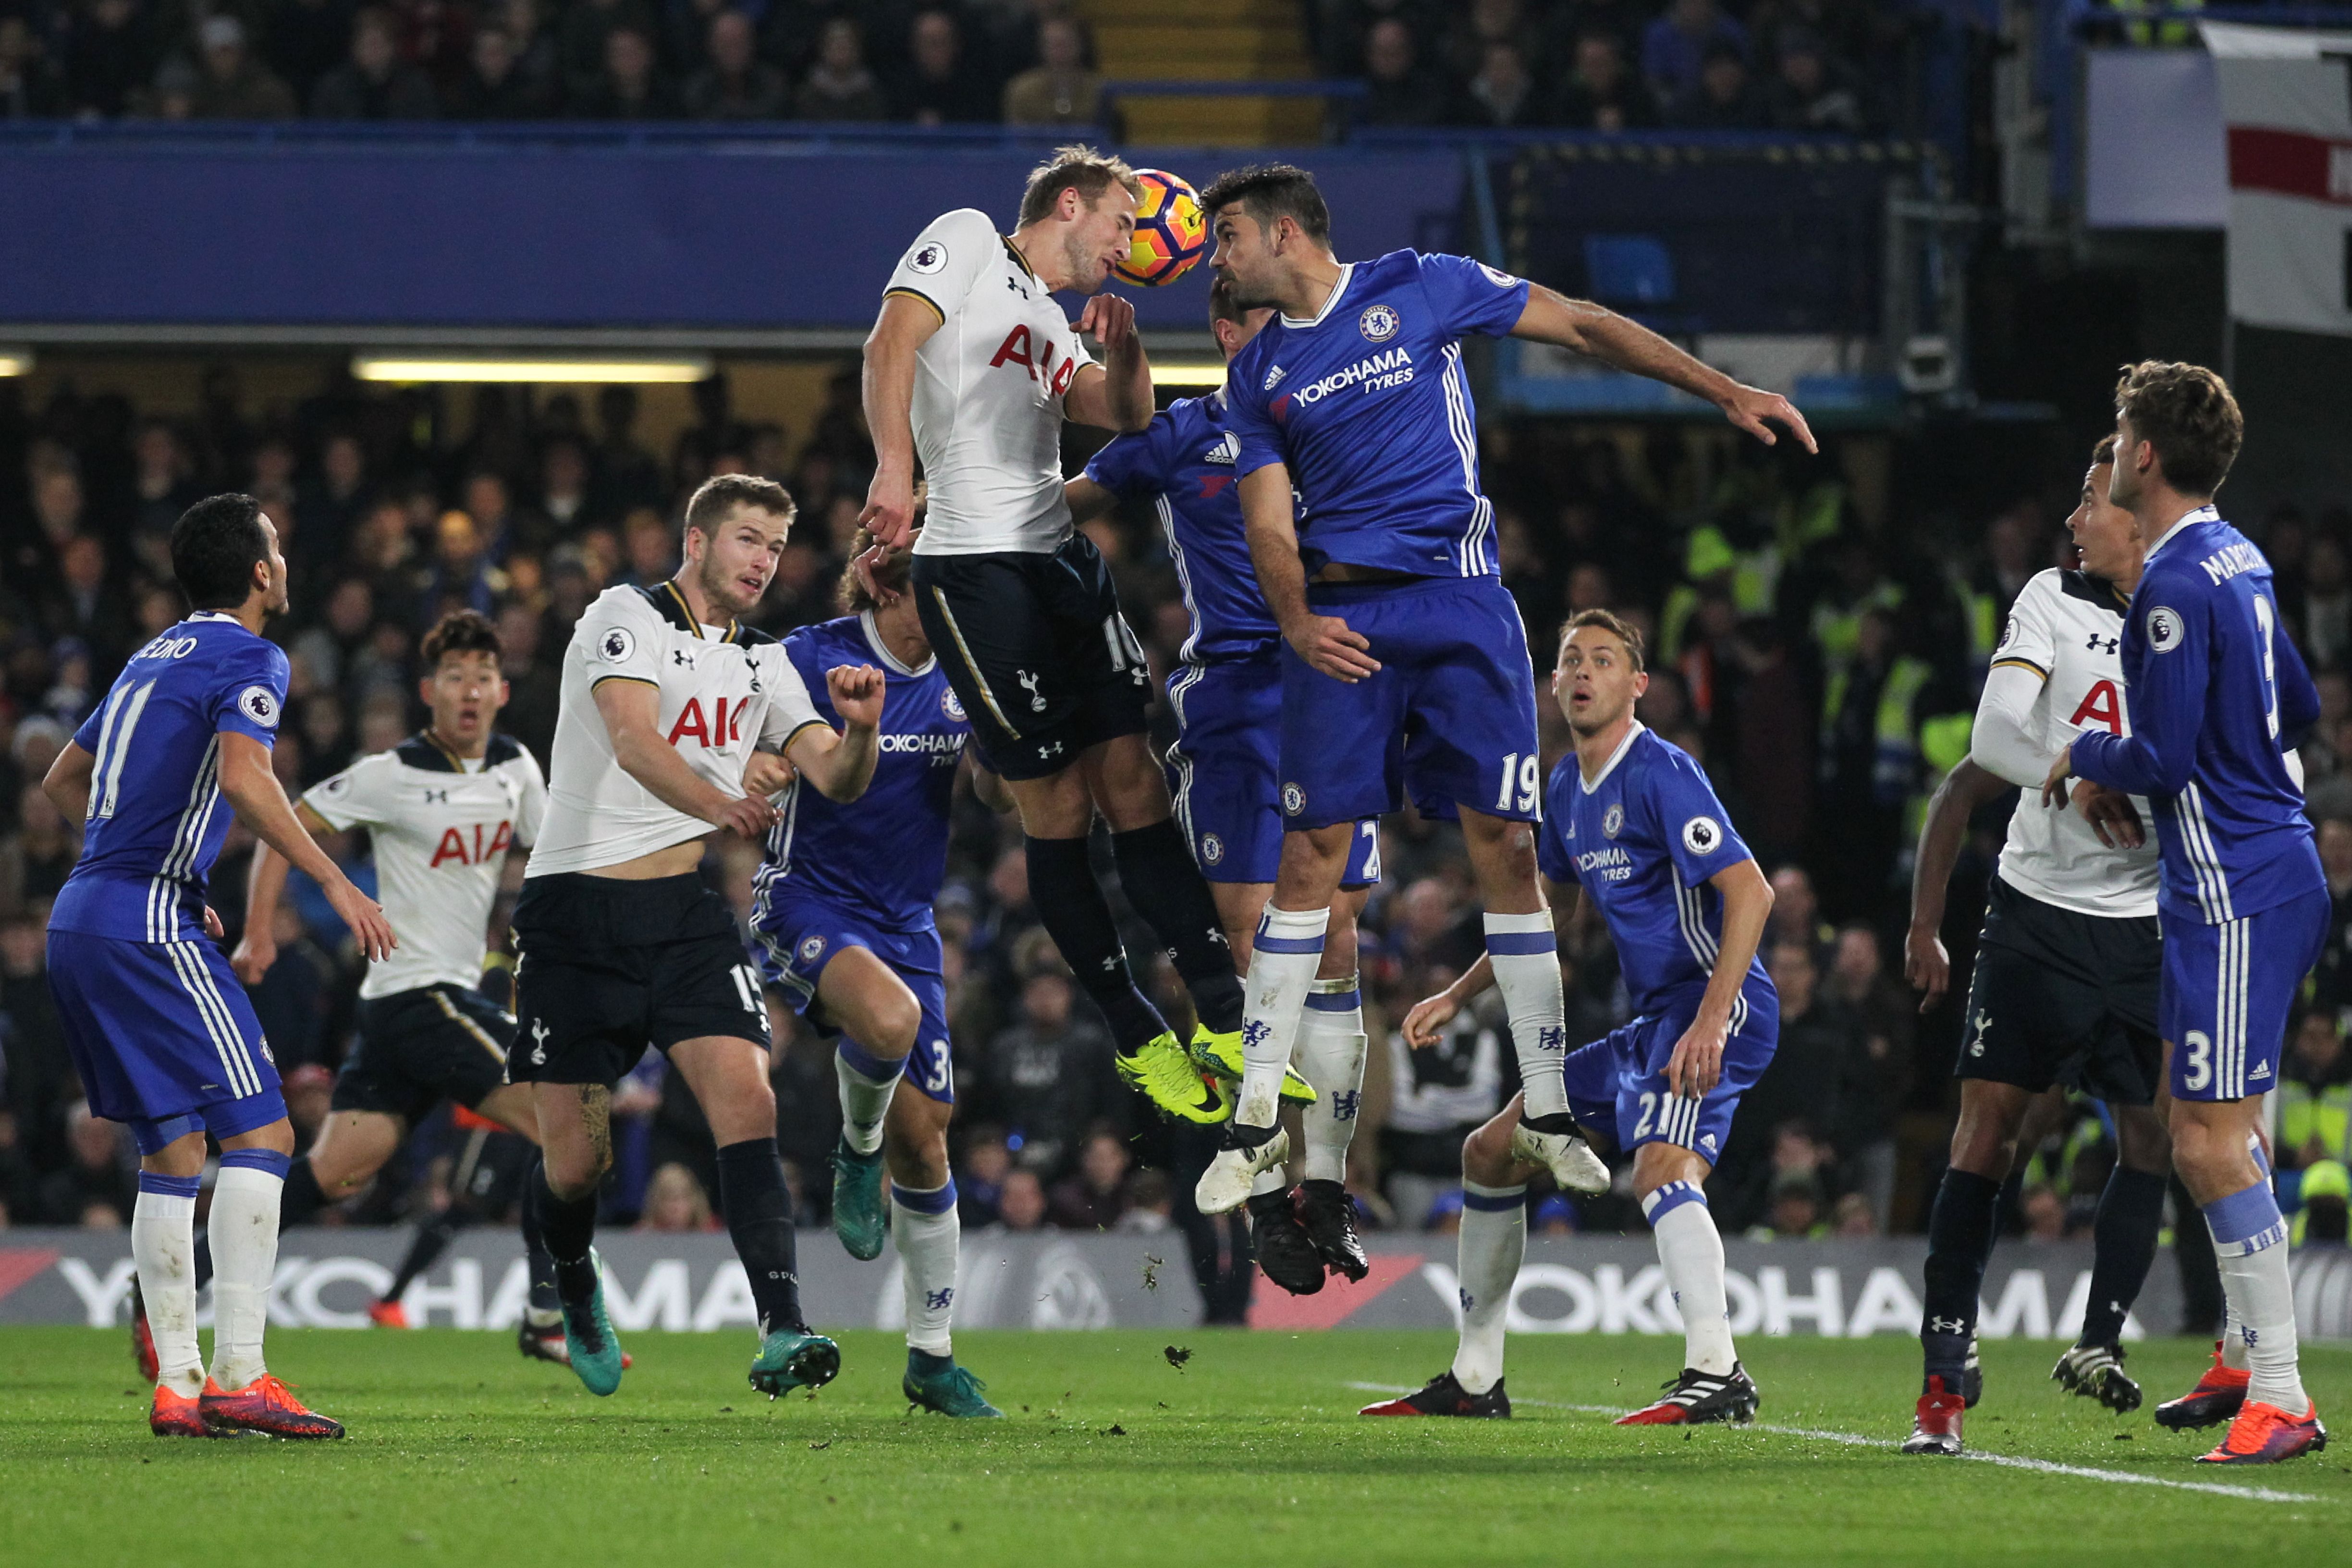 Tottenham Hotspur's English striker Harry Kane (CL) and Chelsea's Brazilian-born Spanish striker Diego Costa (CR) go up for a header during the English Premier League football match between Chelsea and Tottenham Hotspur at Stamford Bridge in London on November 26, 2016. (Photo by Ian Kington/AFP/Getty Images)